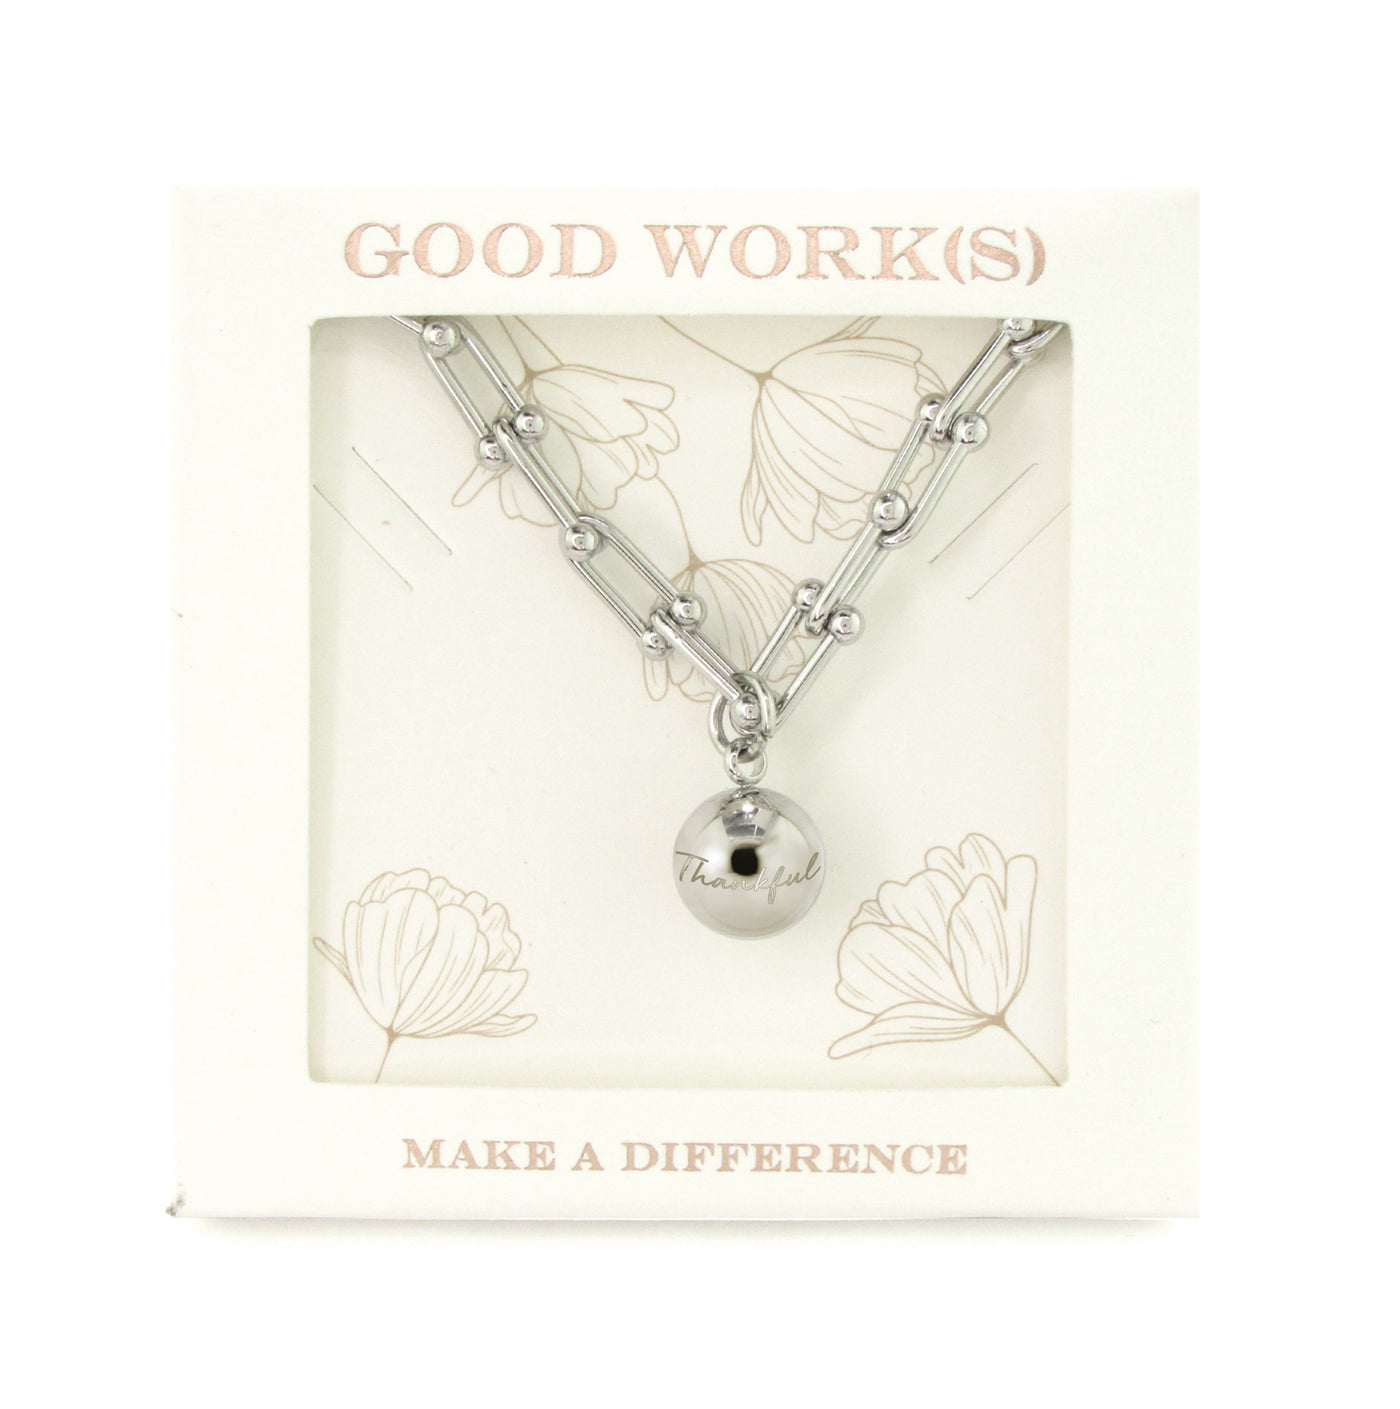 Thankful Necklace-Good Work(s) Make A Difference® | Christian and Inspirational Jewelry Company in Vernon, California